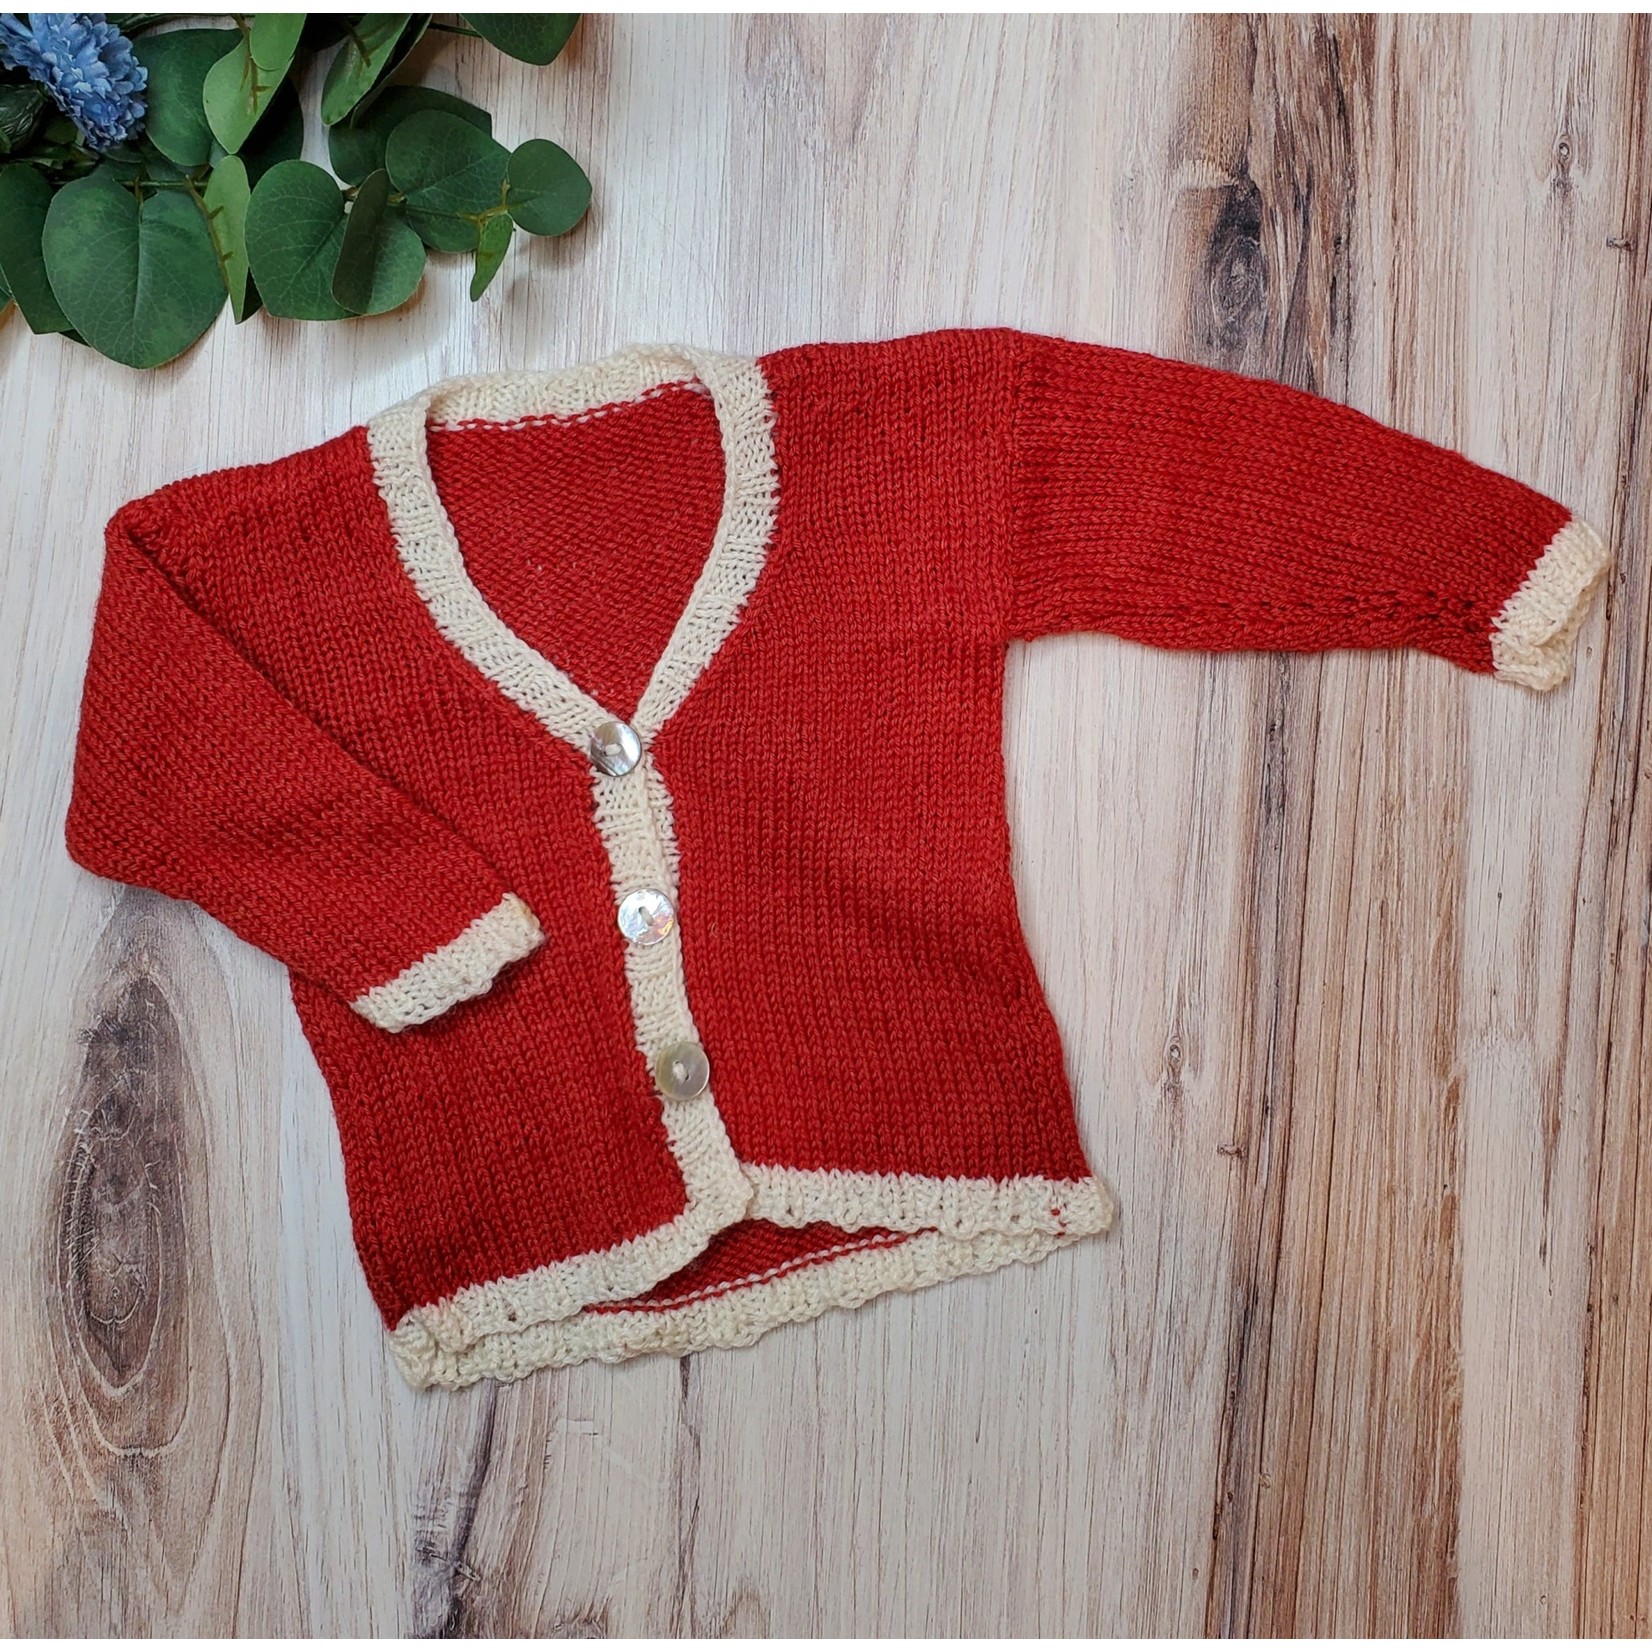 Roan's Repertoire Newborn Sweater - Knitted - Red & White -  Size 0-3 mos.